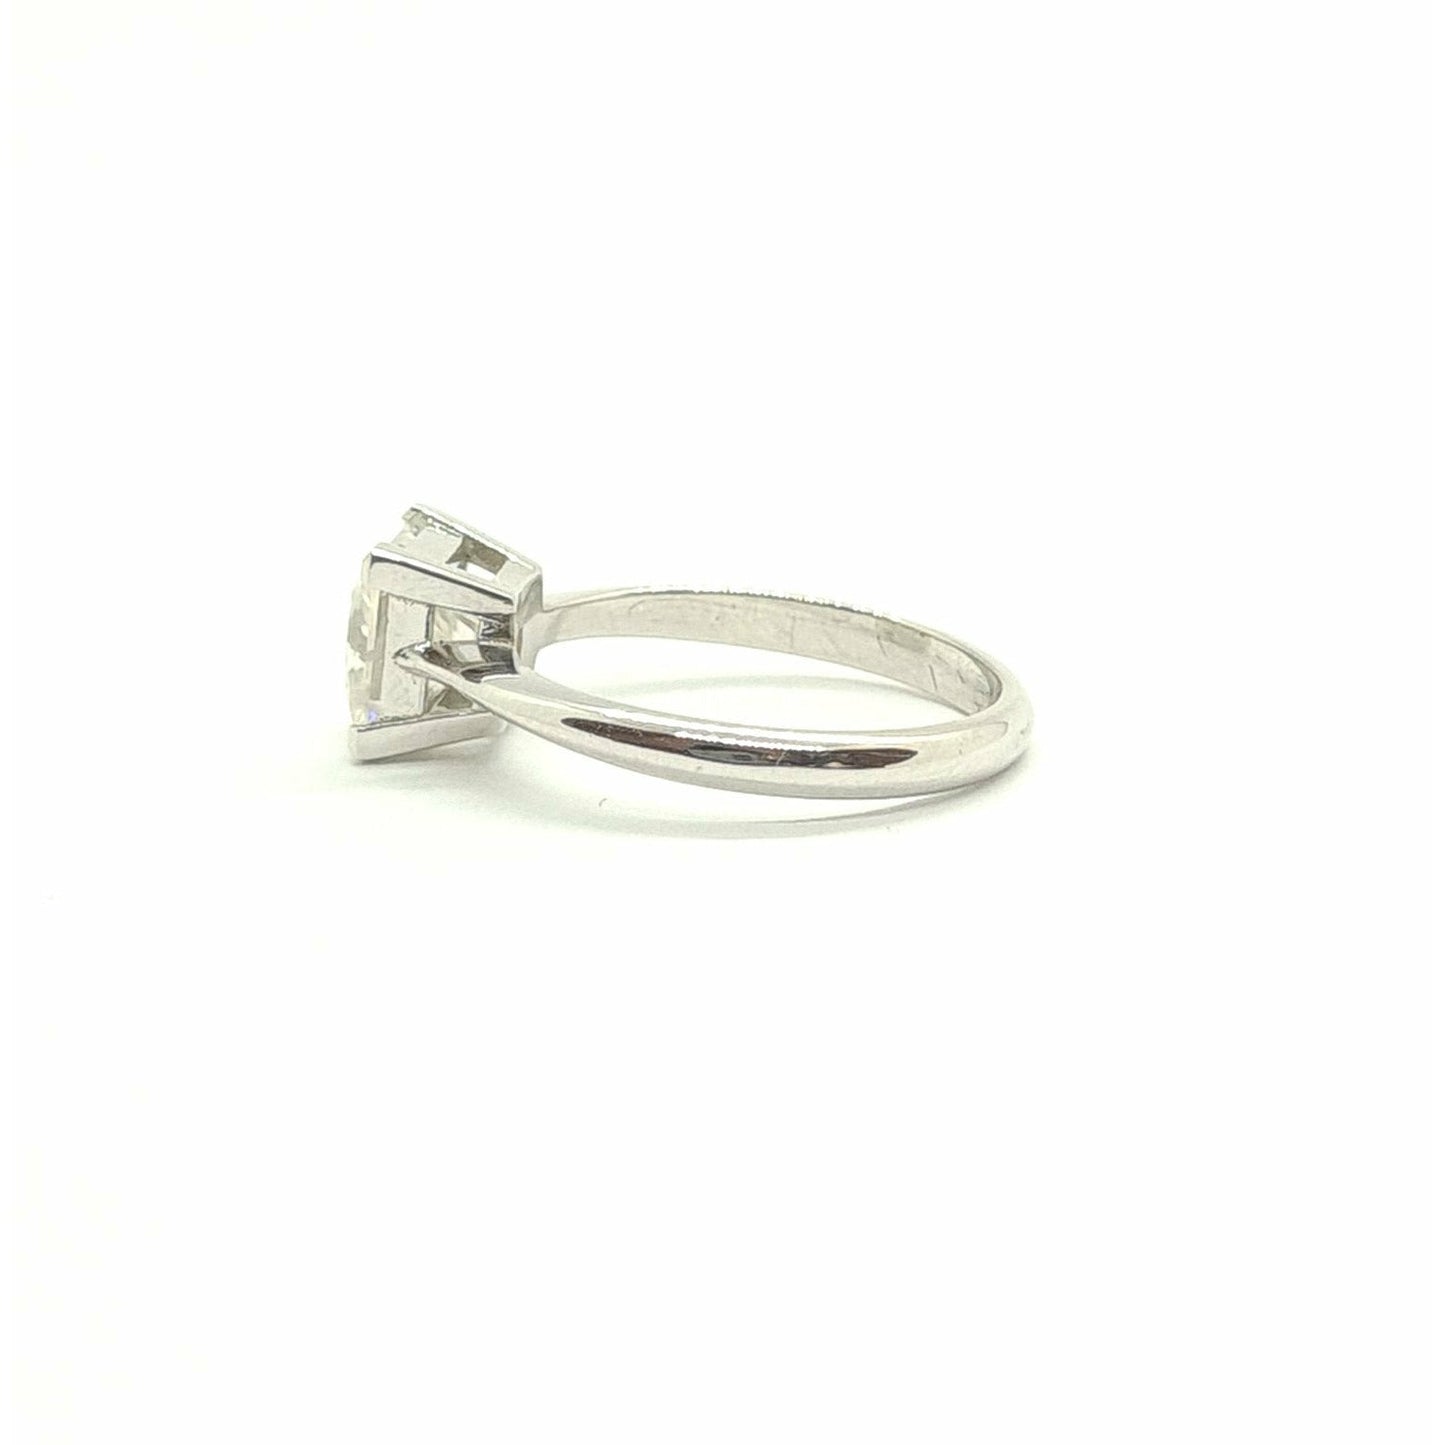 Princess cut moissanite solitaire engagement ring in white gold